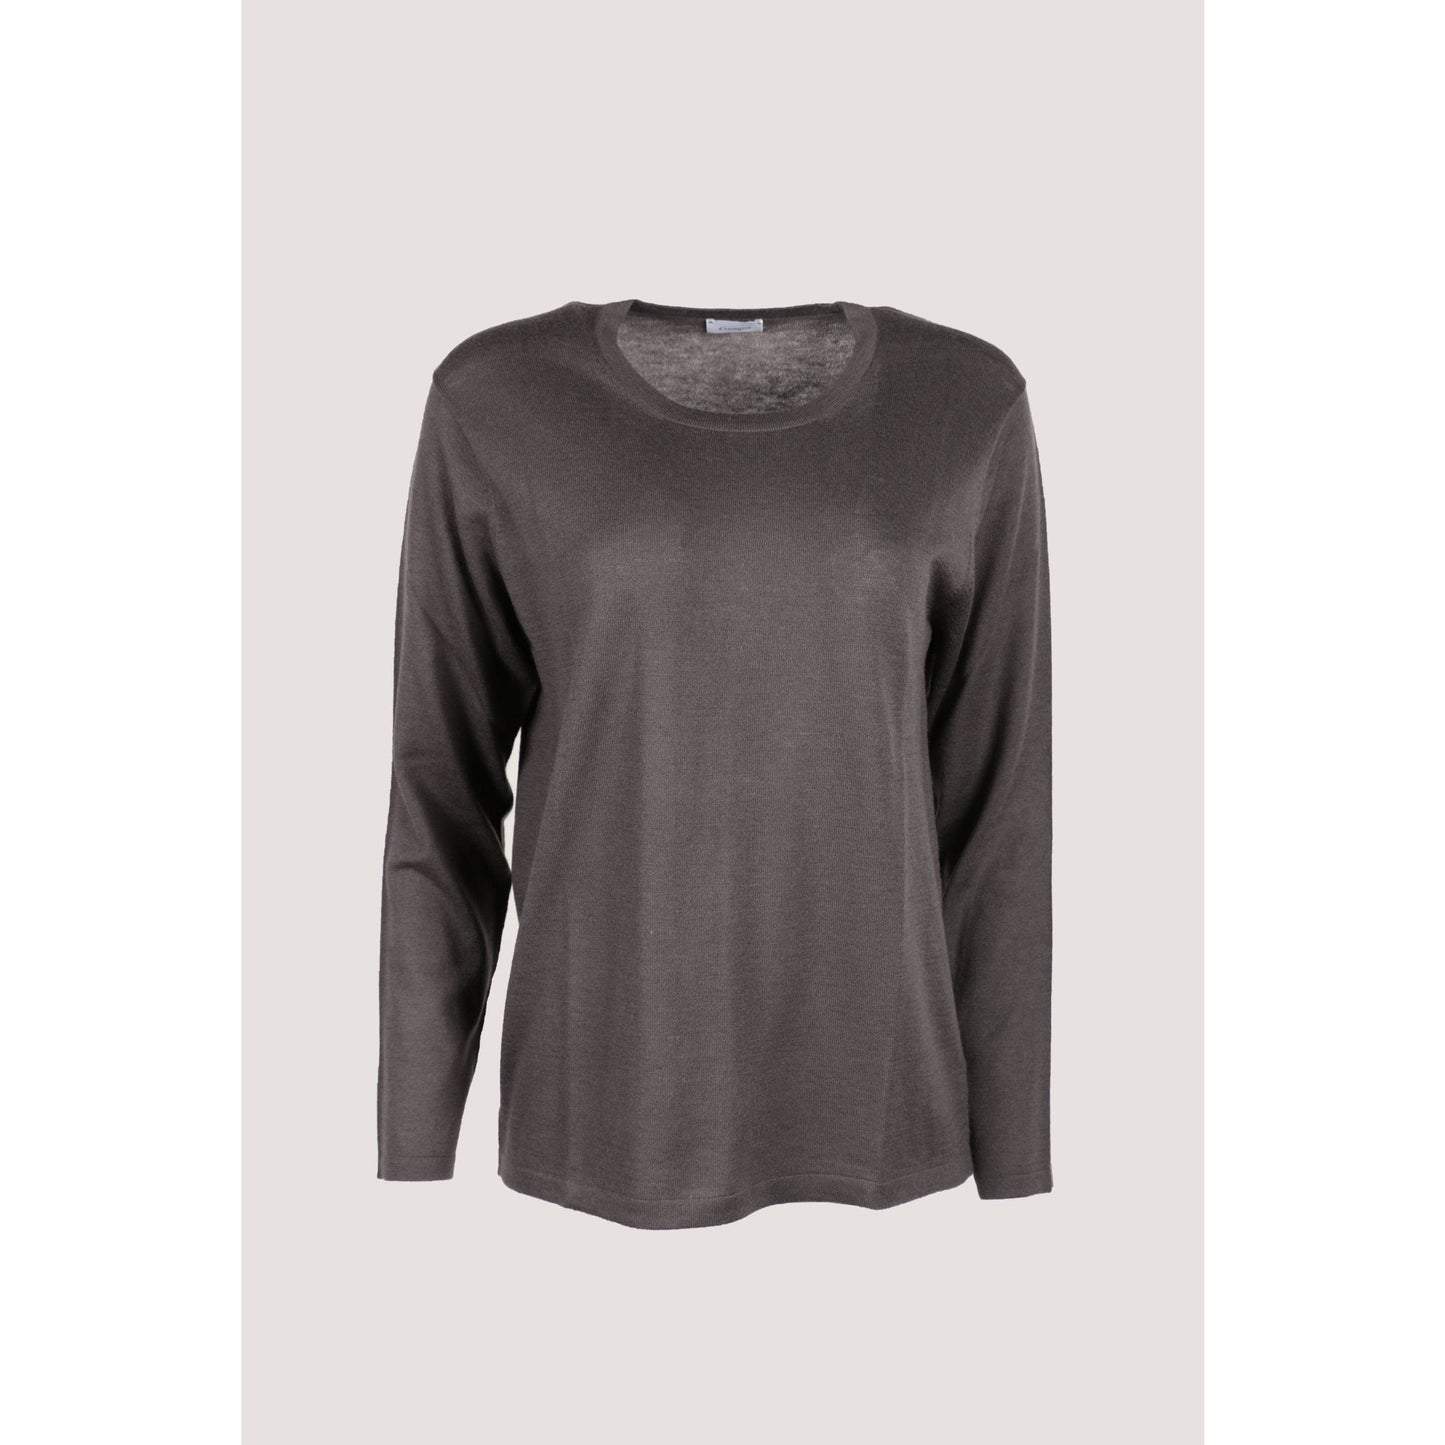 Round Neck Sweater Charcoal - Crumpet Chowk